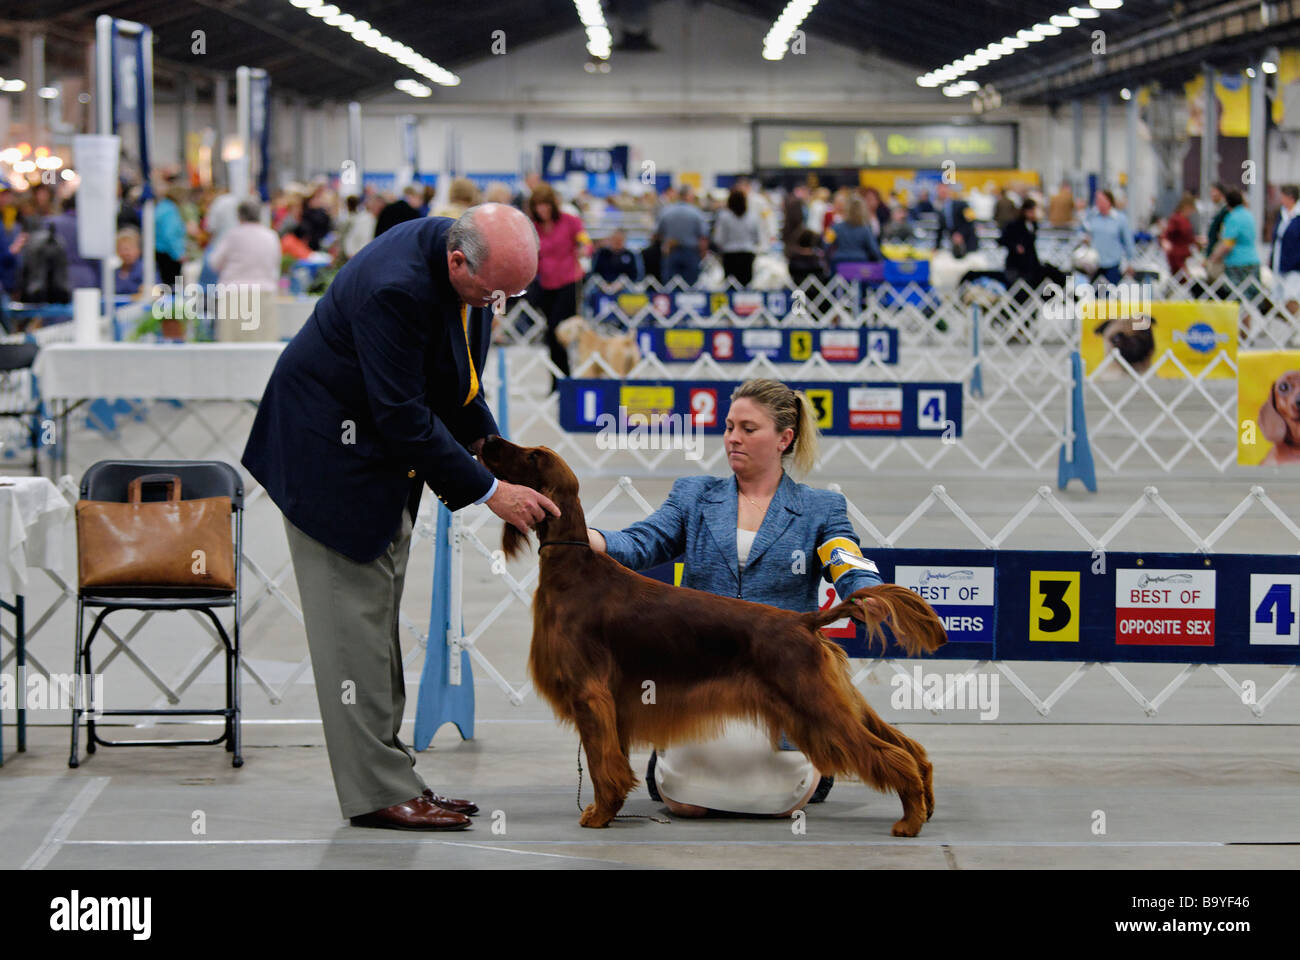 Irish Setter being Judged in the Show Ring at the Louisville Dog Show in Louisville Kentucky Stock Photo